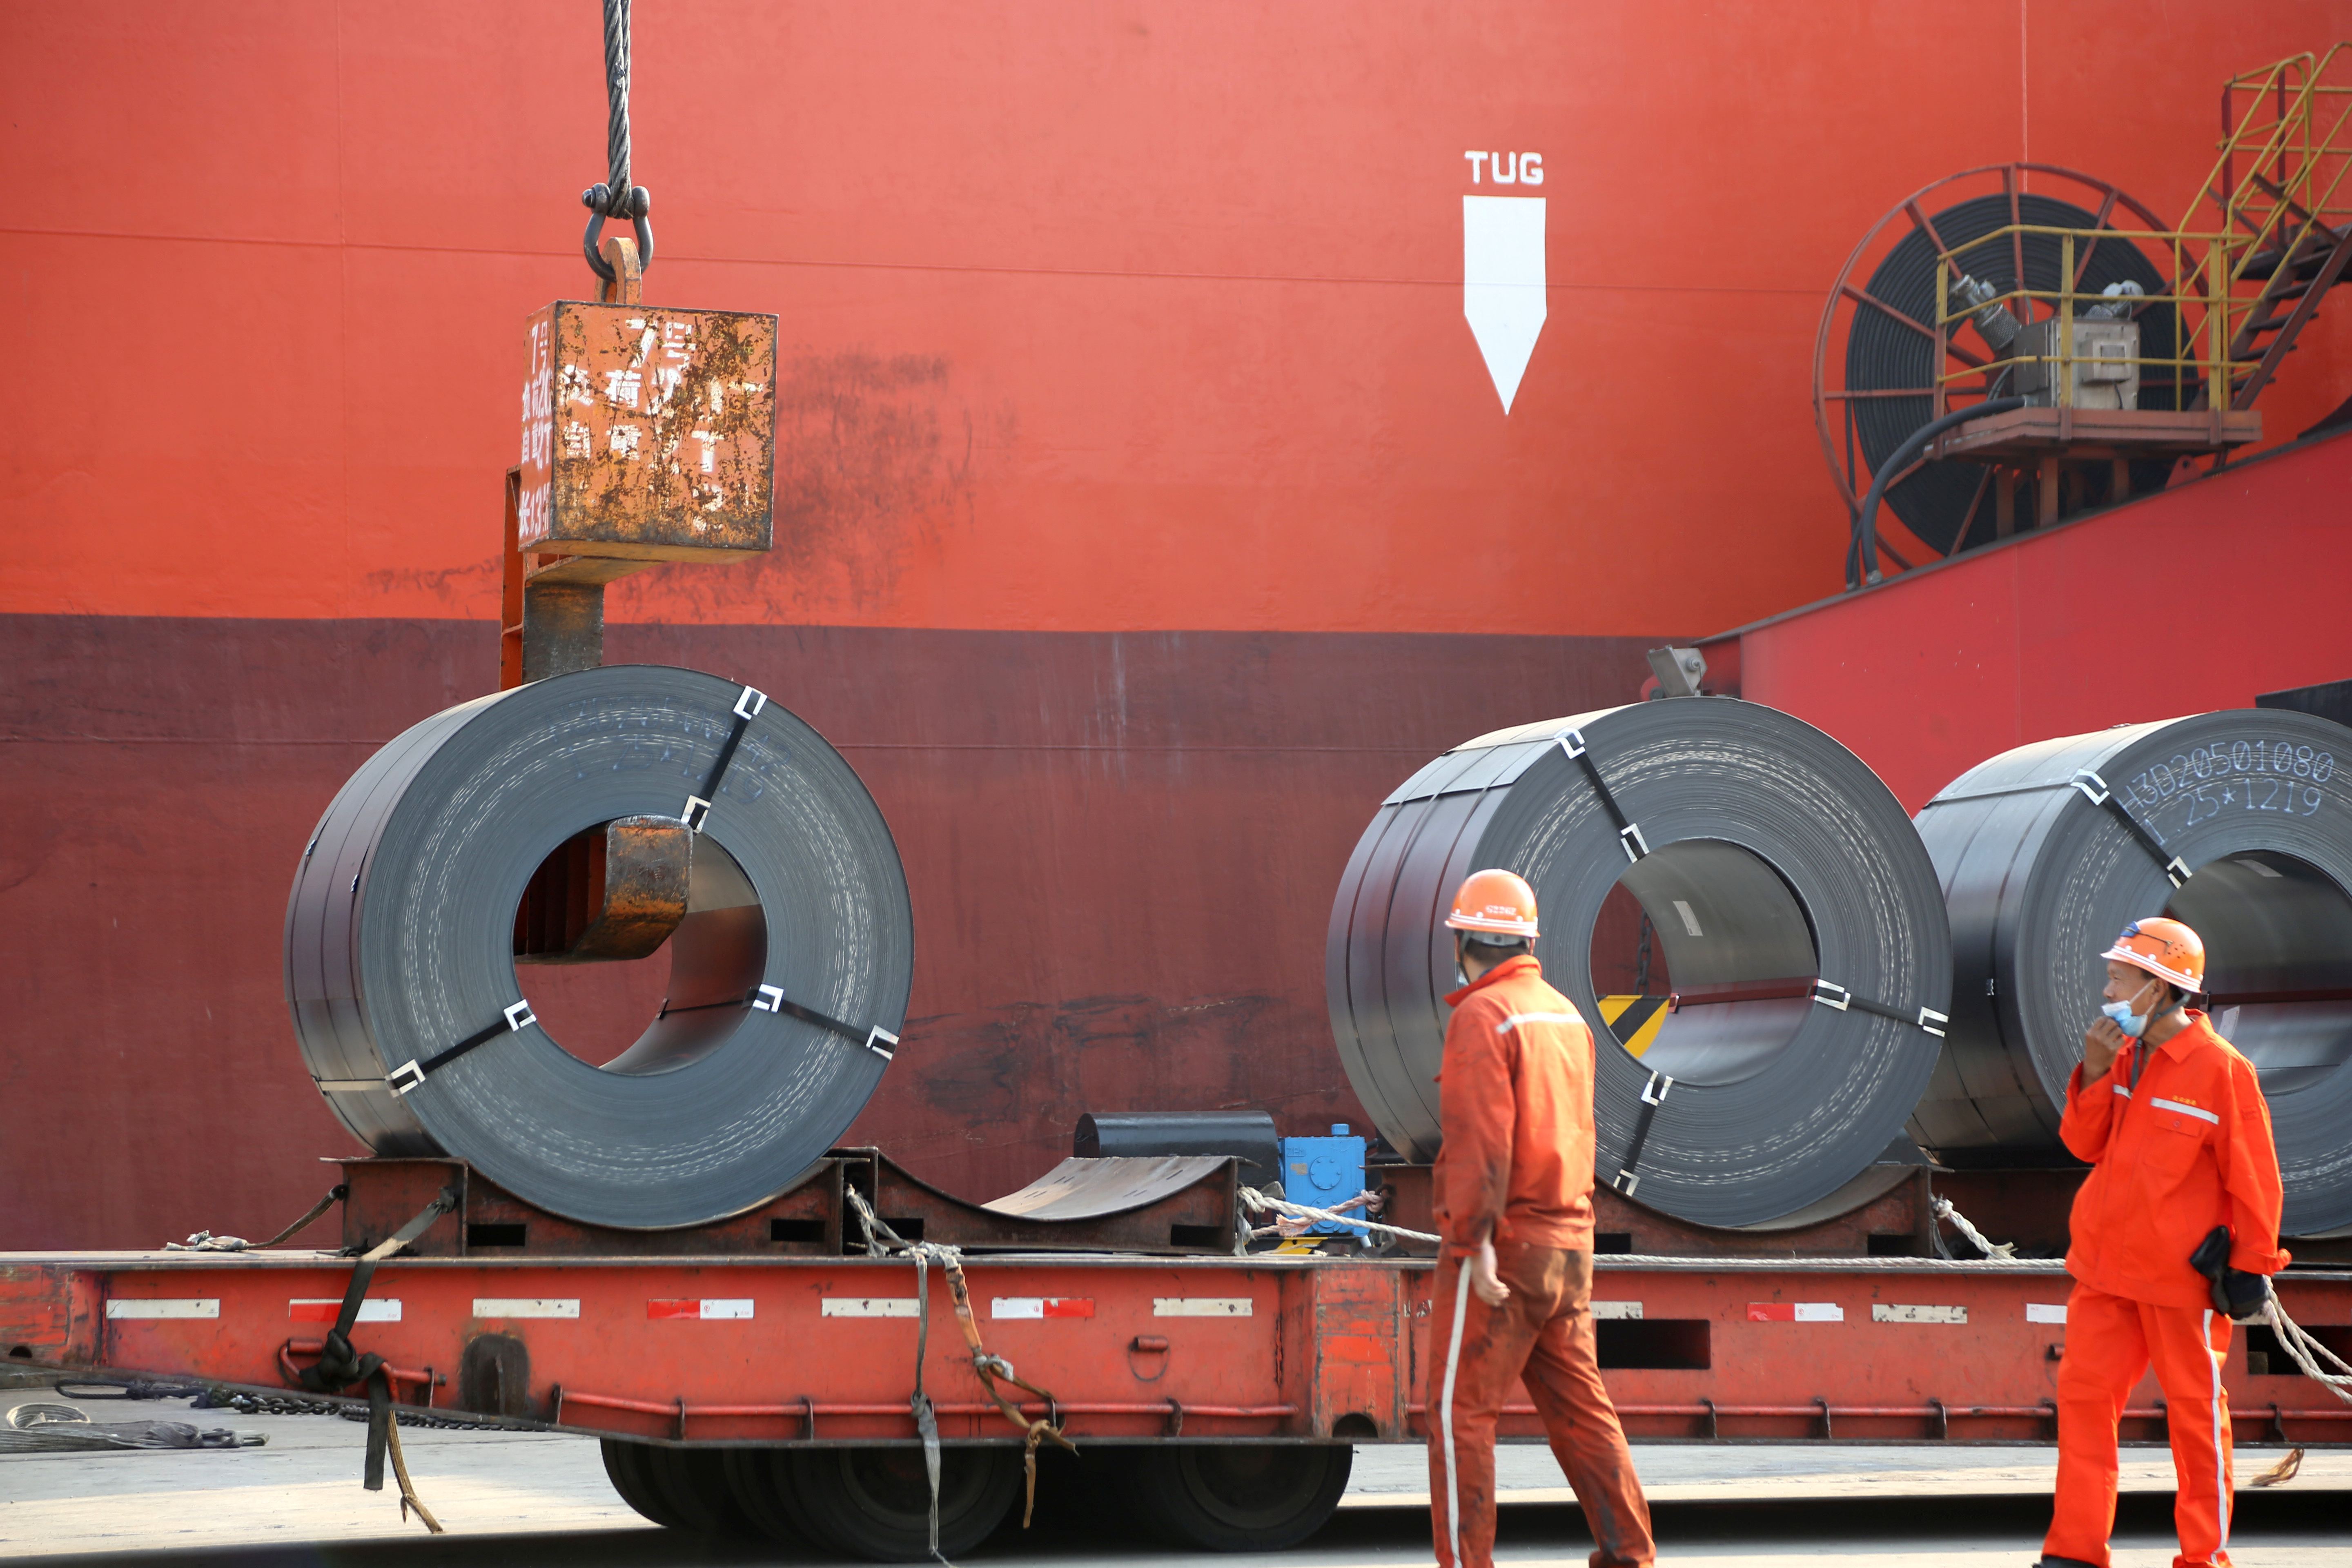 Workers load steel products for export to a cargo ship at a port in Lianyungang